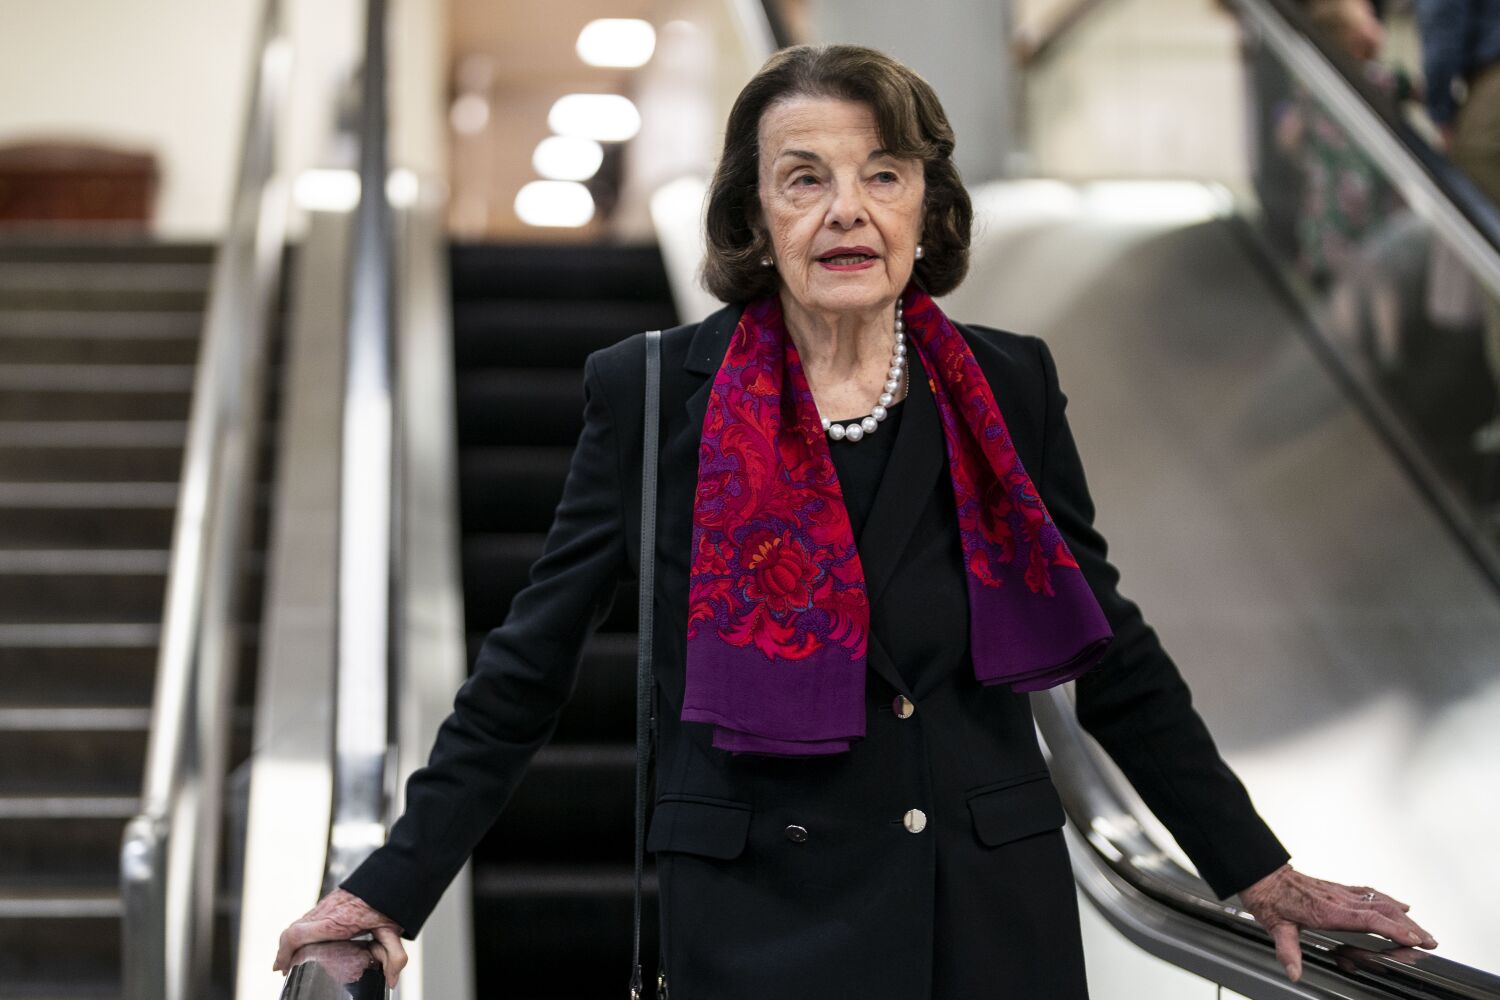 White House urges patience as Sen. Feinstein's absence leaves judicial agenda in jeopardy